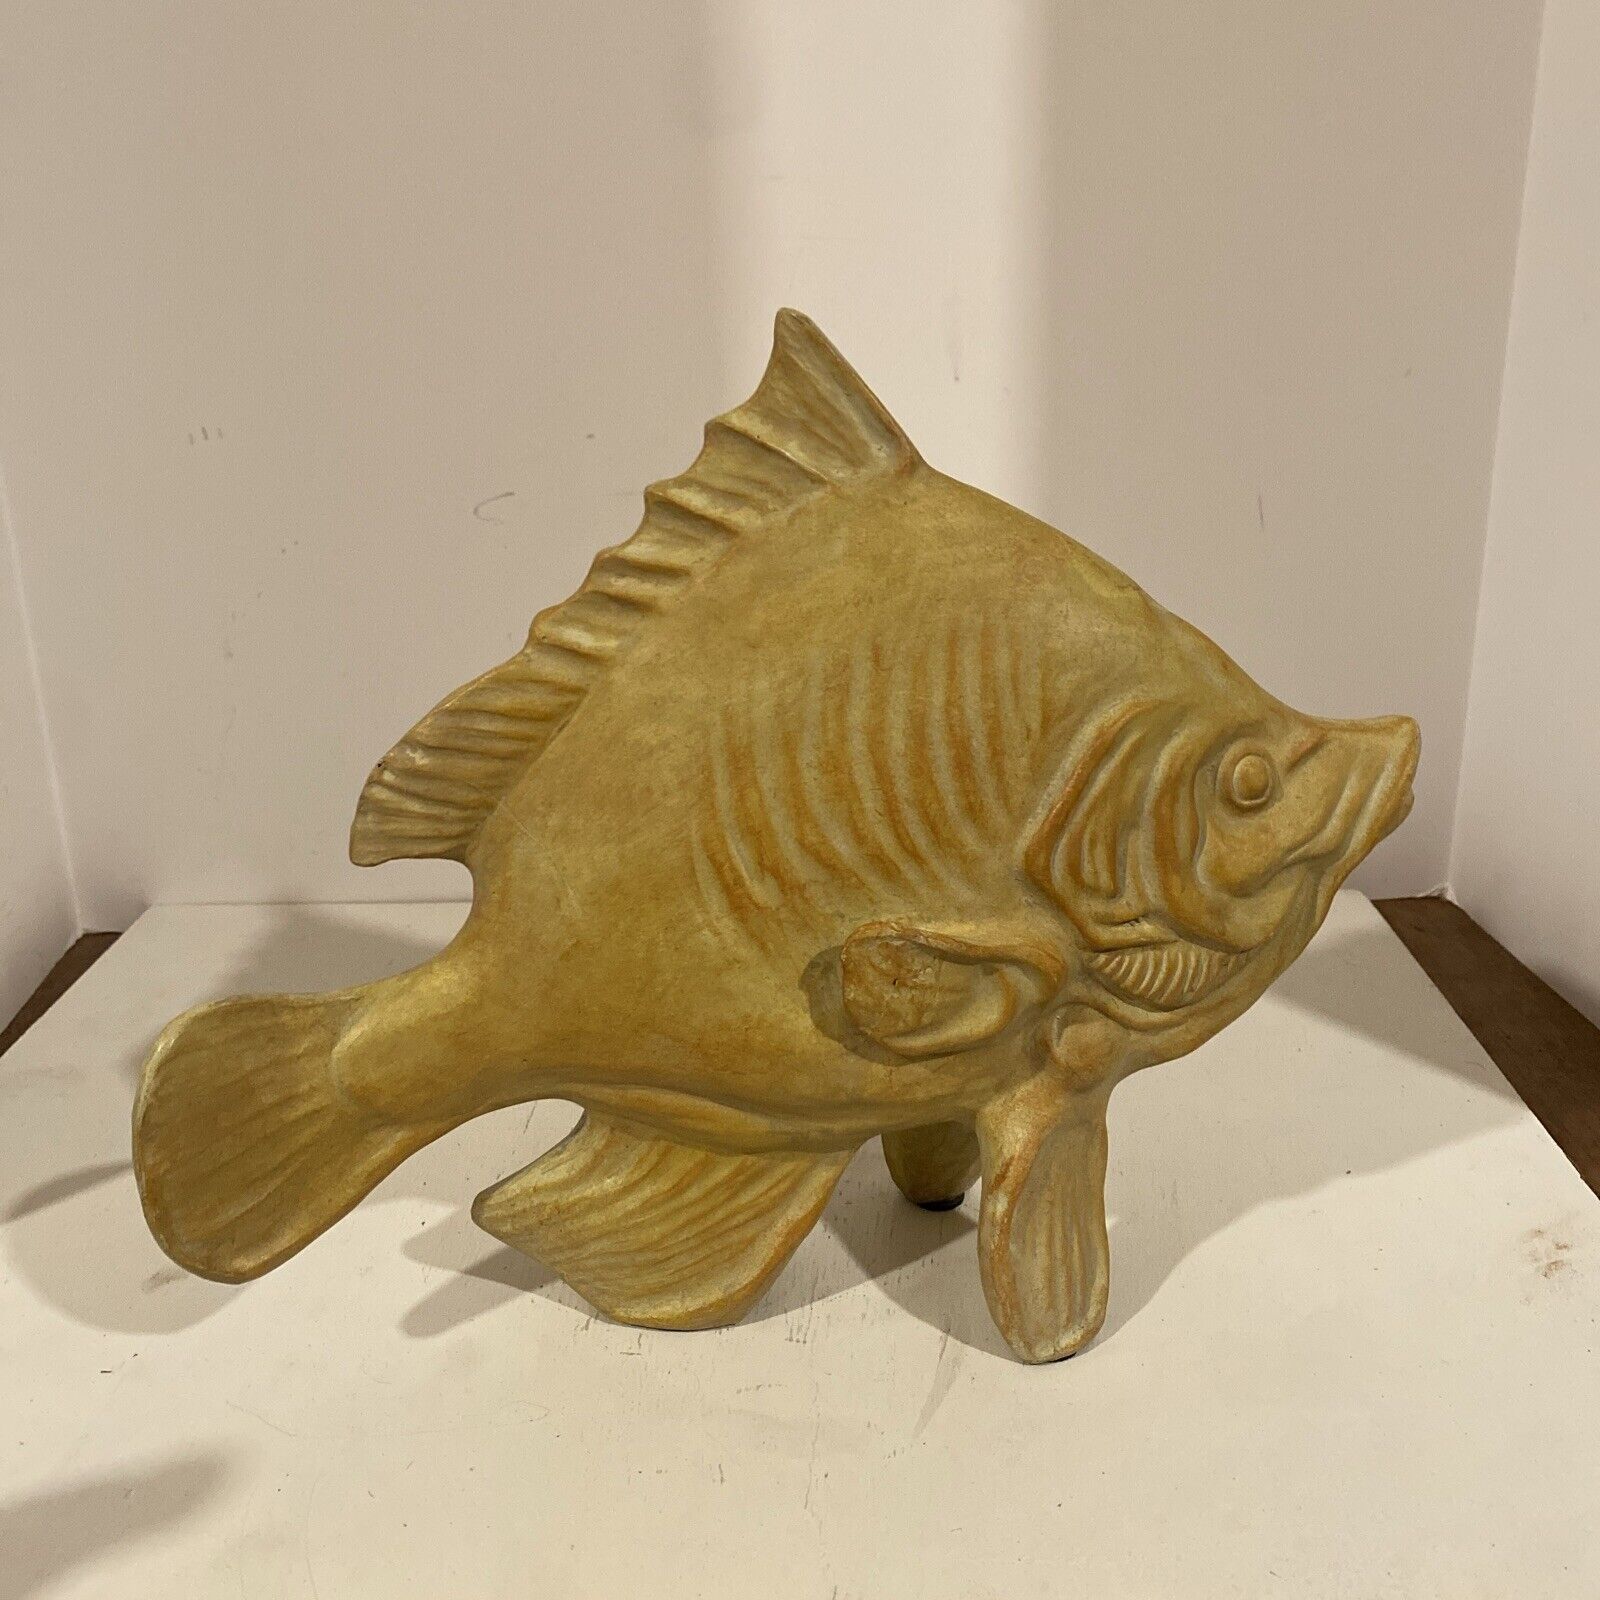 Vintage 11” Tall 12” Wide Fish Figurine Free standing Composite/Resin Display ￼